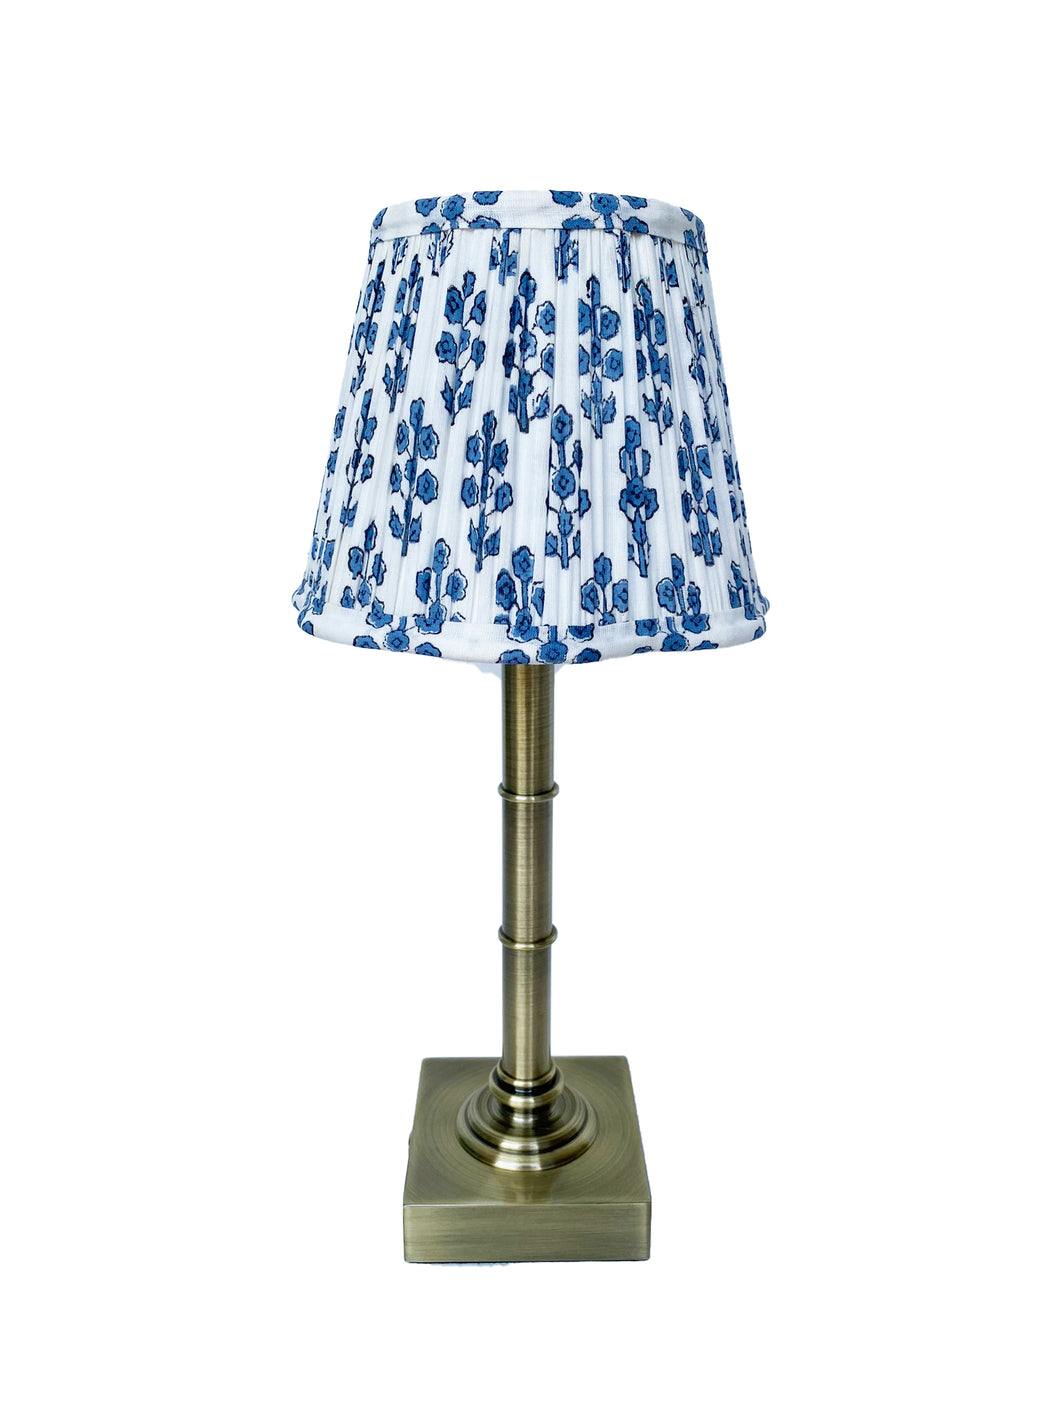 16cm blue & white scalloped lampshade